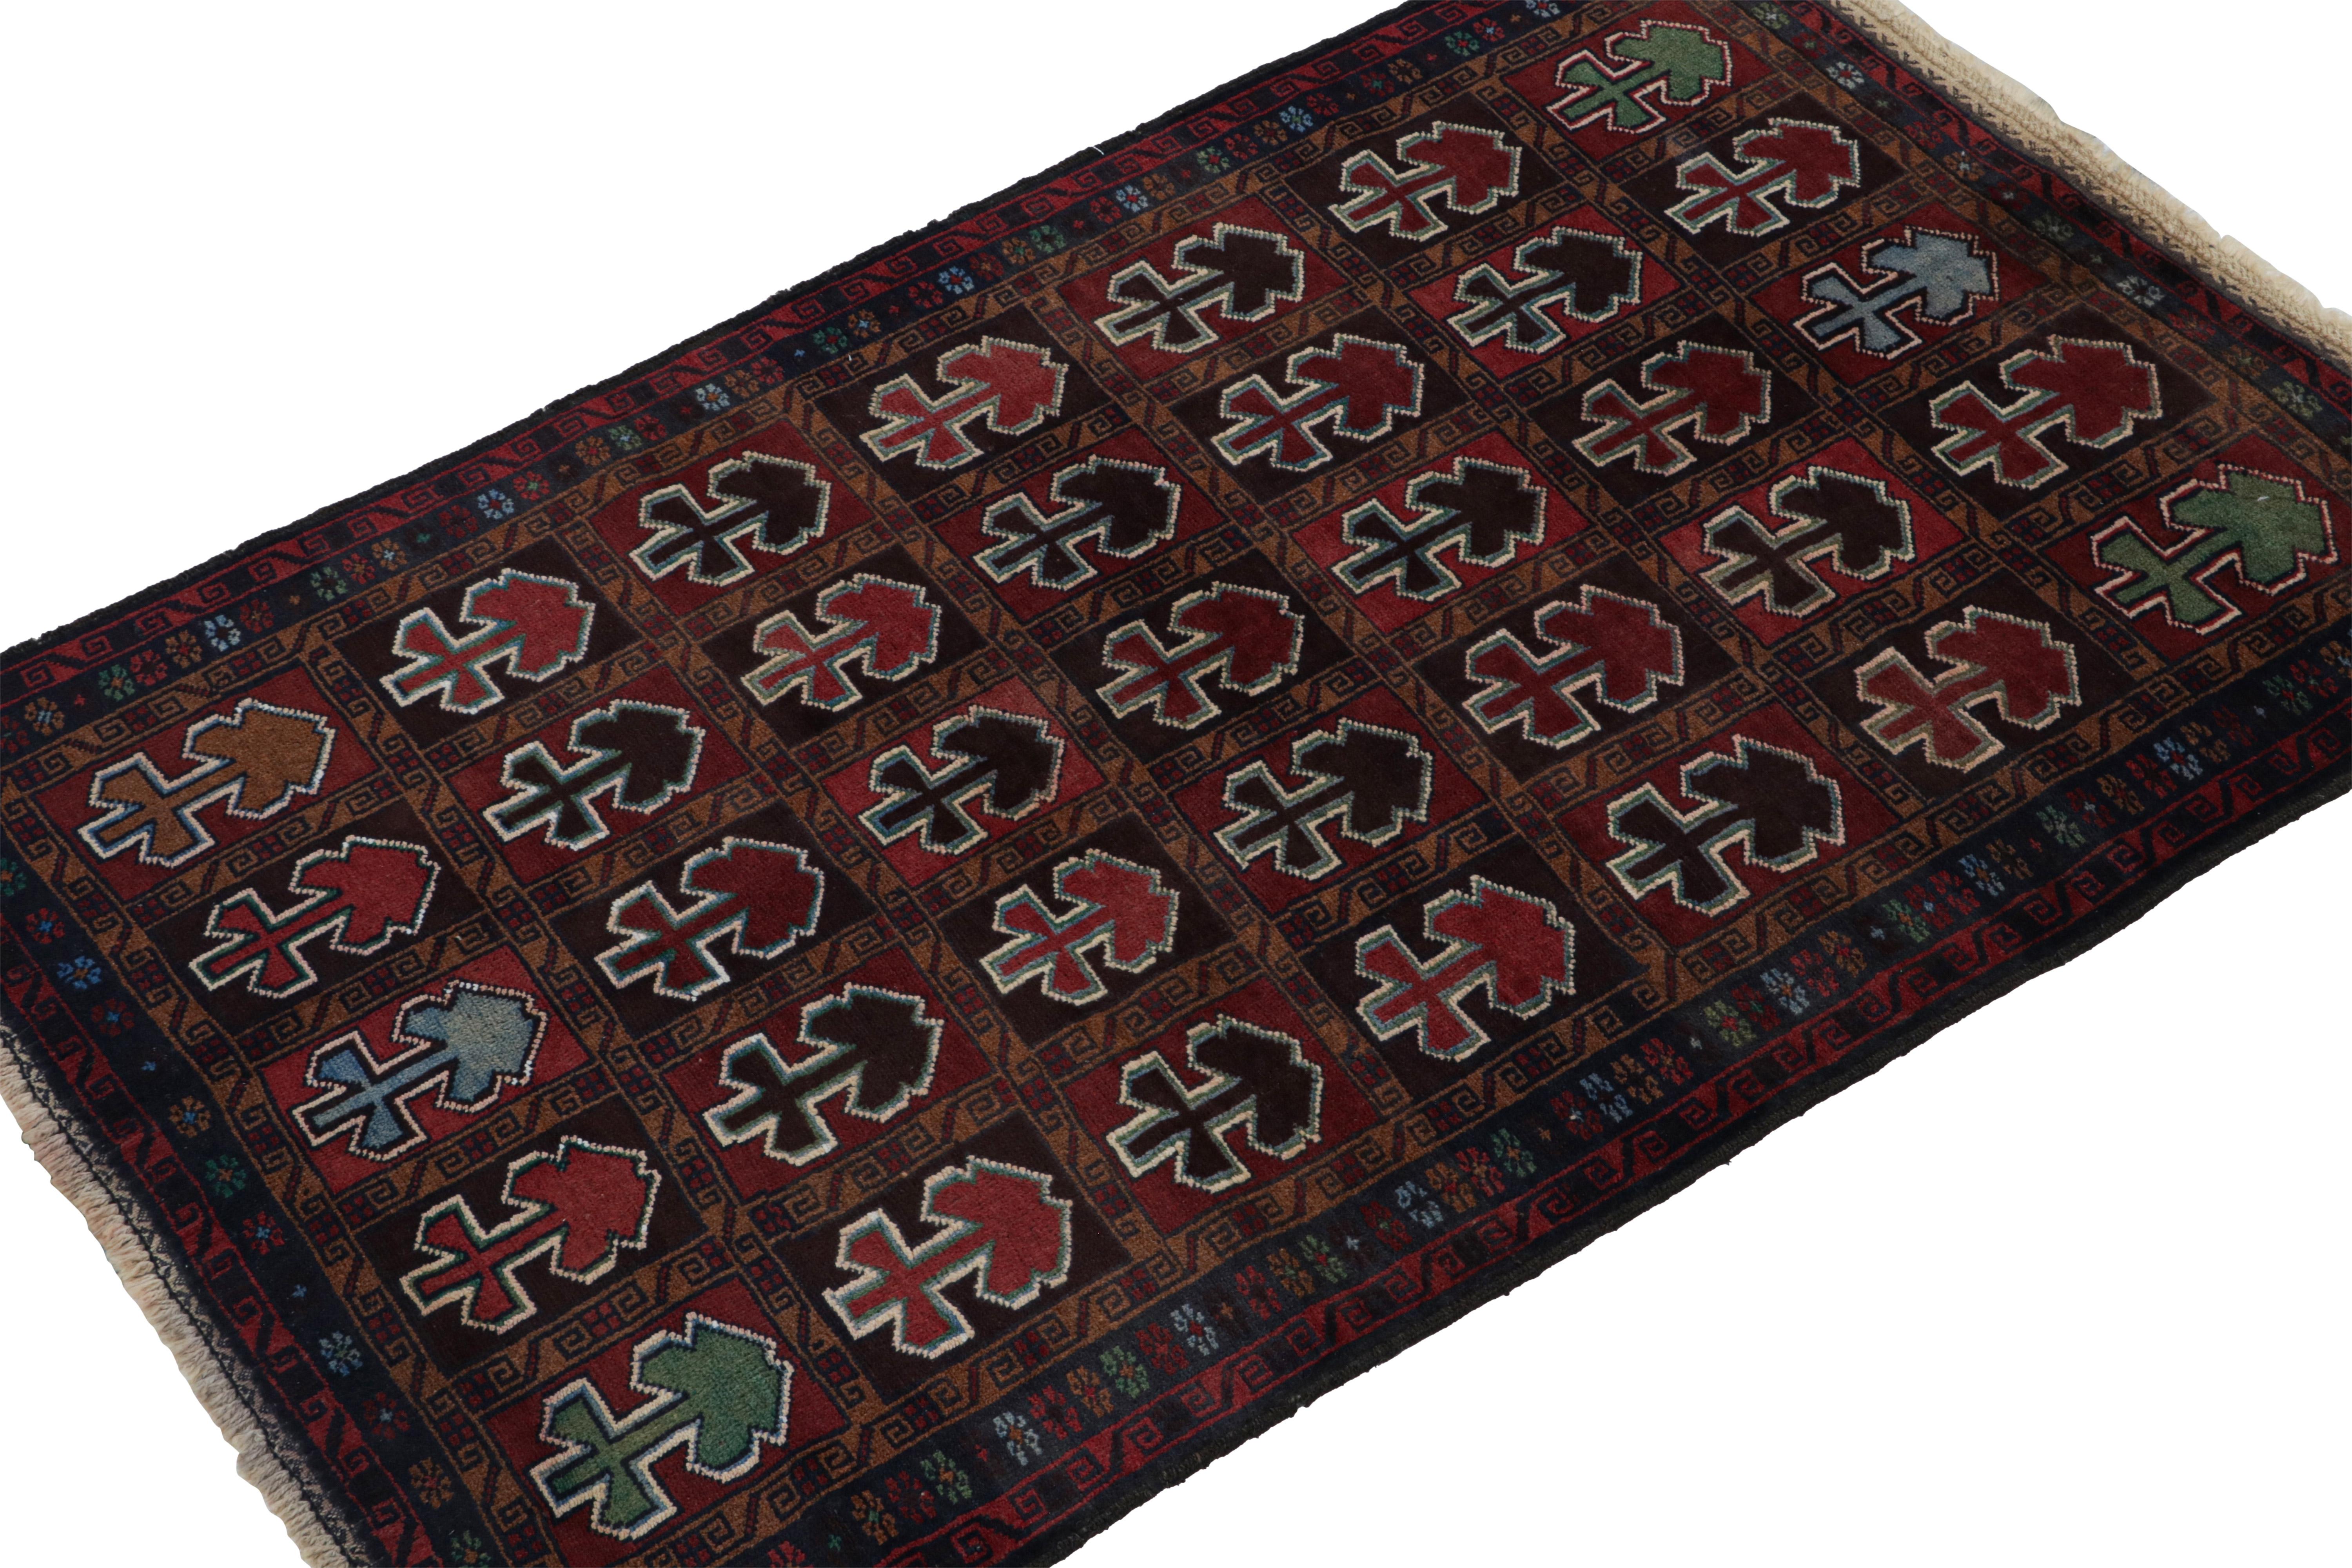 Hand-knotted in wool & goat hair, this vintage tribal rug of the 1950s is a coveted addition to Rug & Kilim’s Antique & Vintage collection. 

On the Design: 

Coming from the Baluch tribe, this 4x6 rug boasts traditional motifs encased in squares -